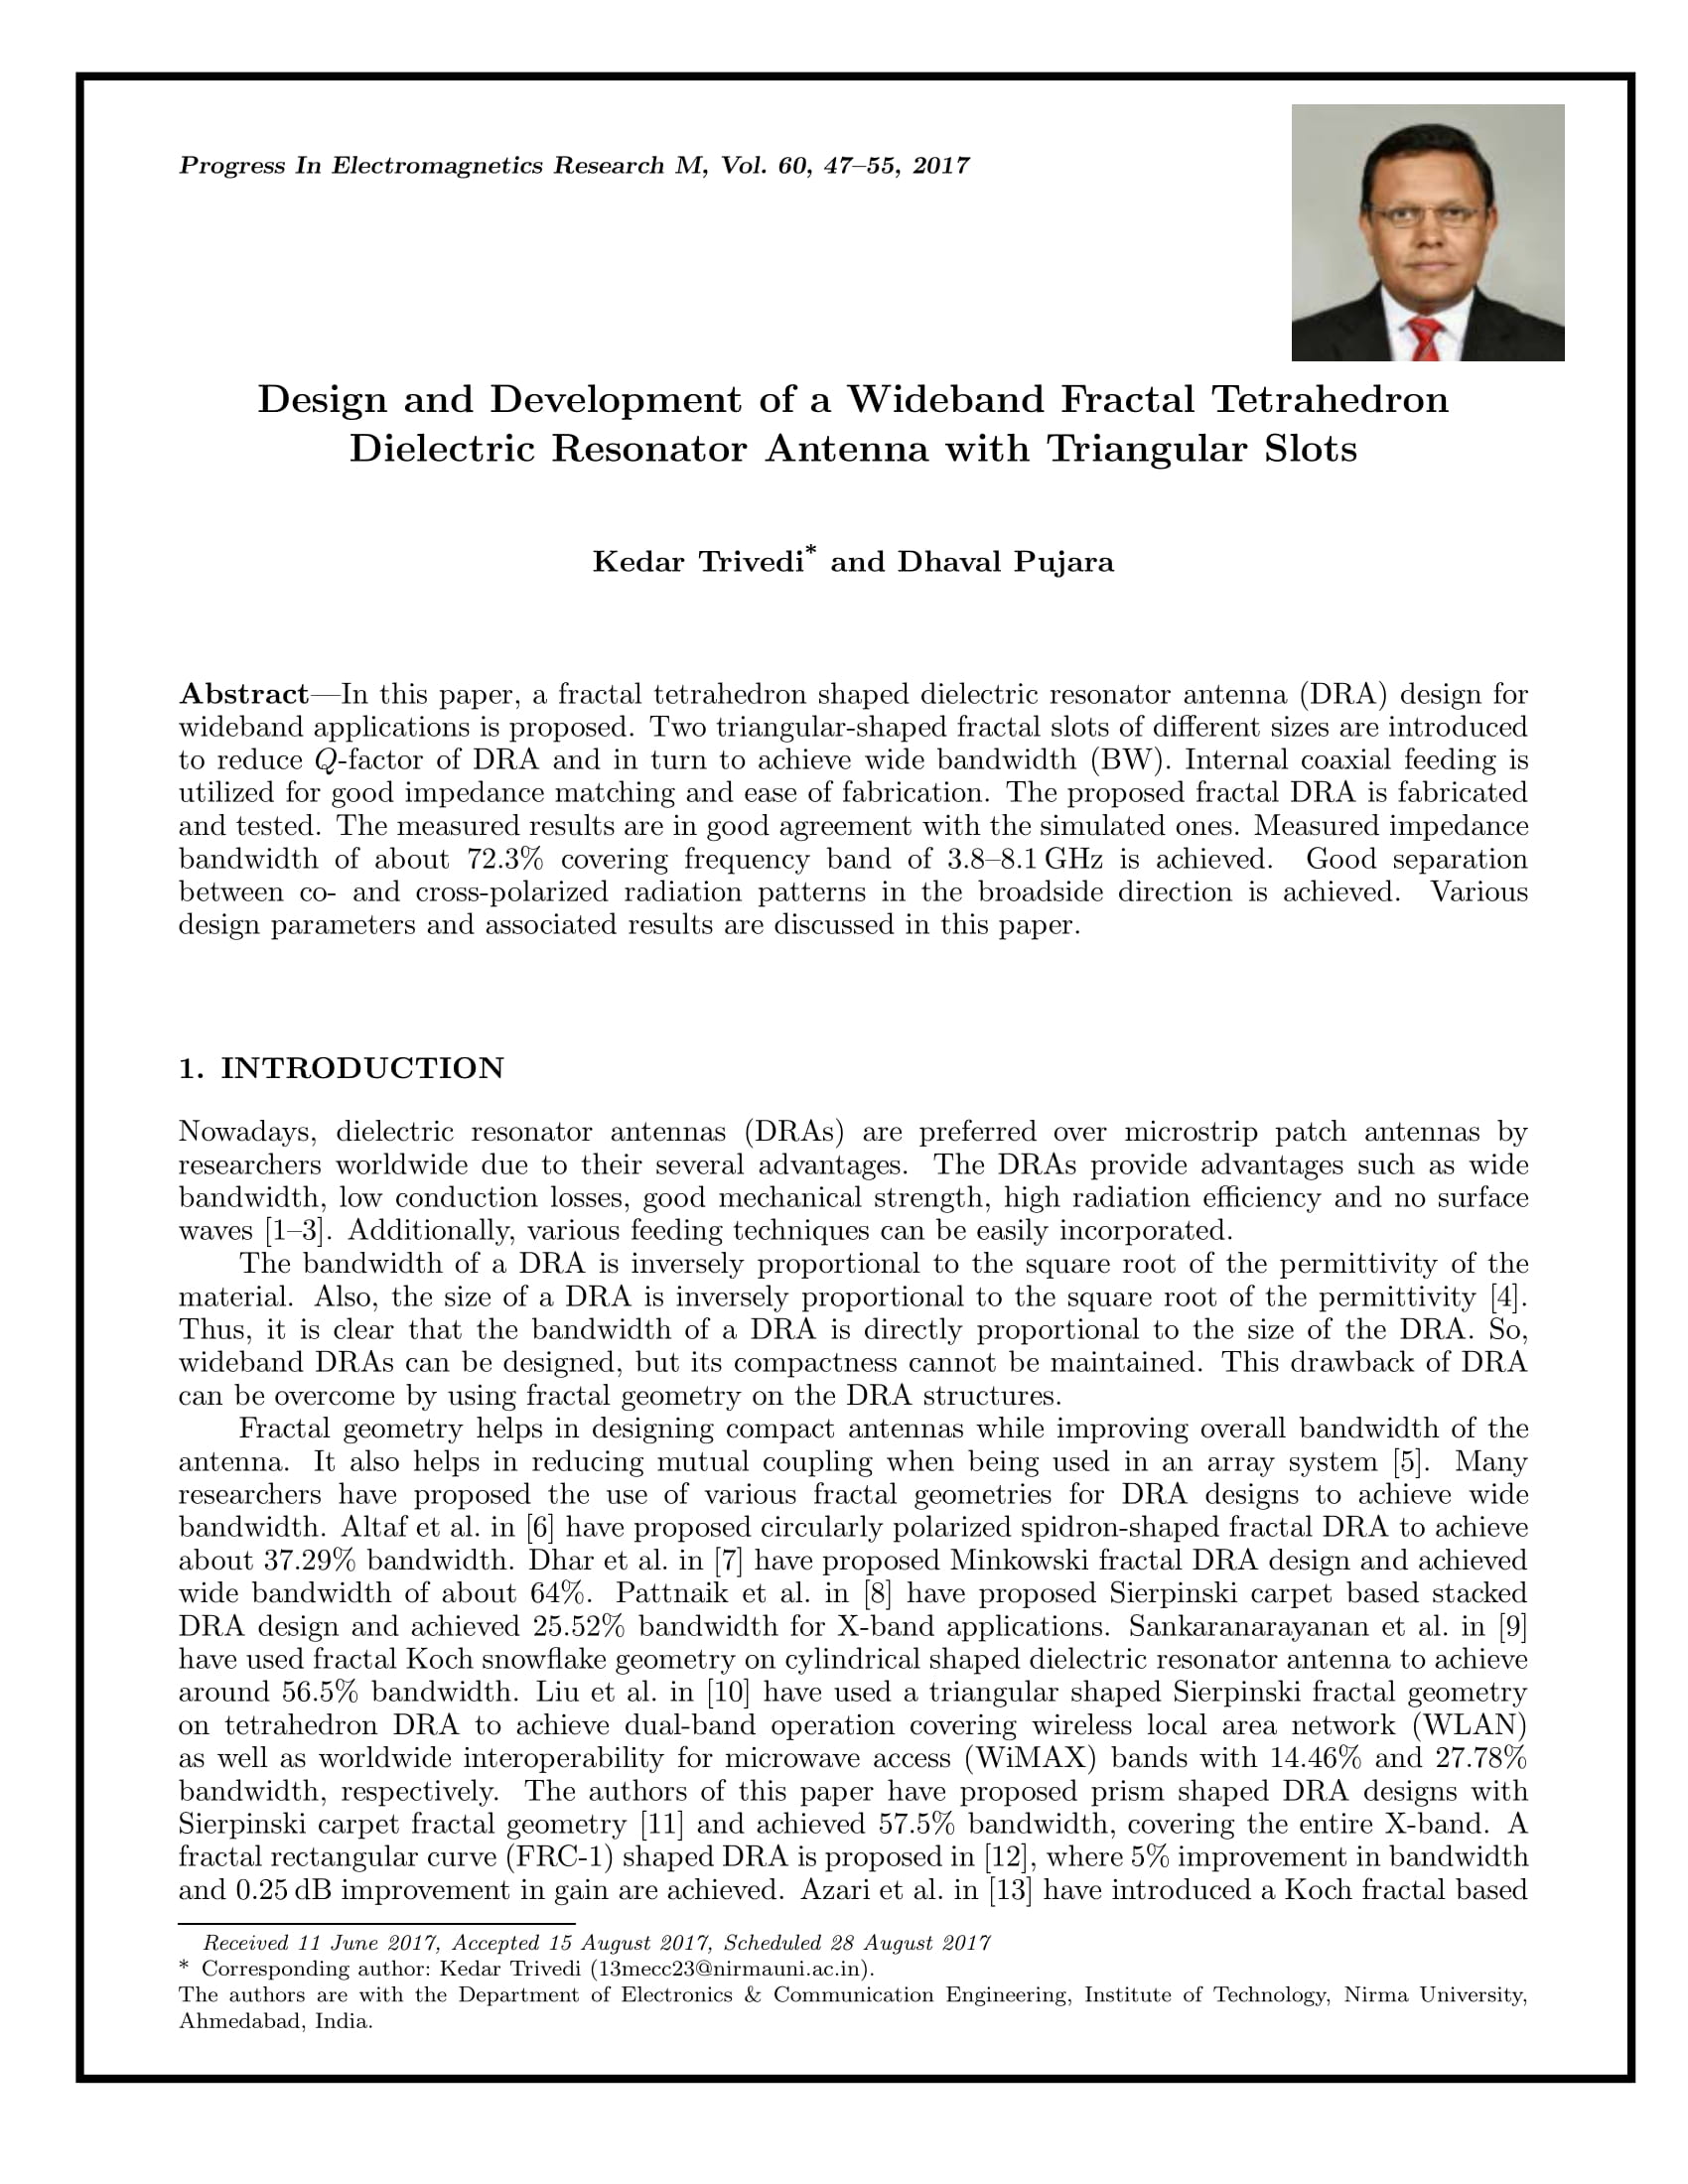 Design and Development of a Wideband Fractal Tetrahedron Dielectric Resonator Antenna with Triangular Slots